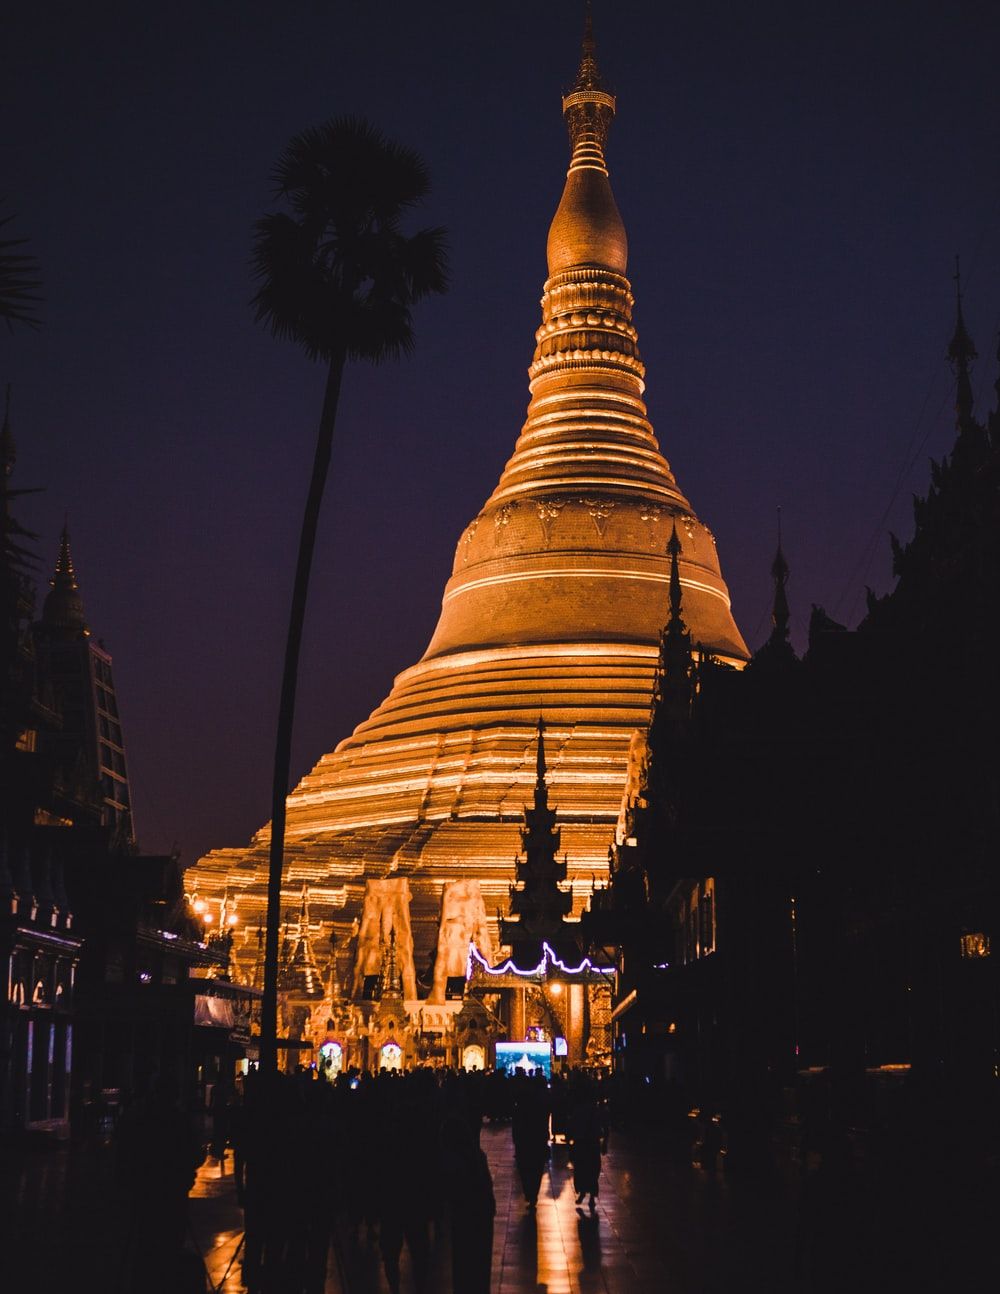 Yangon Picture. Download Free Image